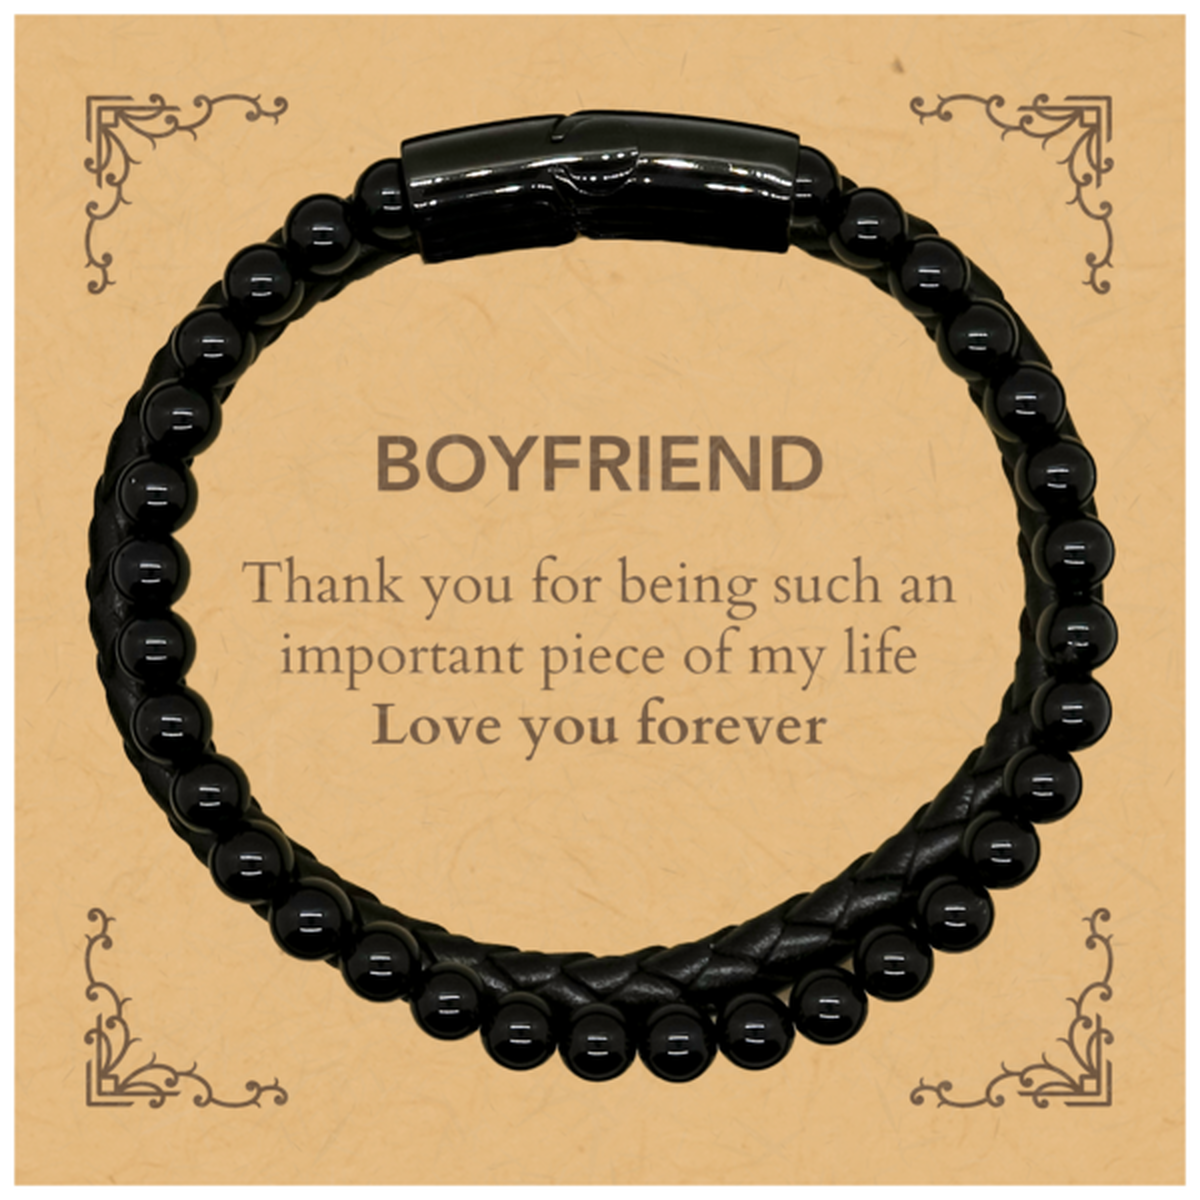 Appropriate Boyfriend Stone Leather Bracelets Epic Birthday Gifts for Boyfriend Thank you for being such an important piece of my life Boyfriend Christmas Mothers Fathers Day